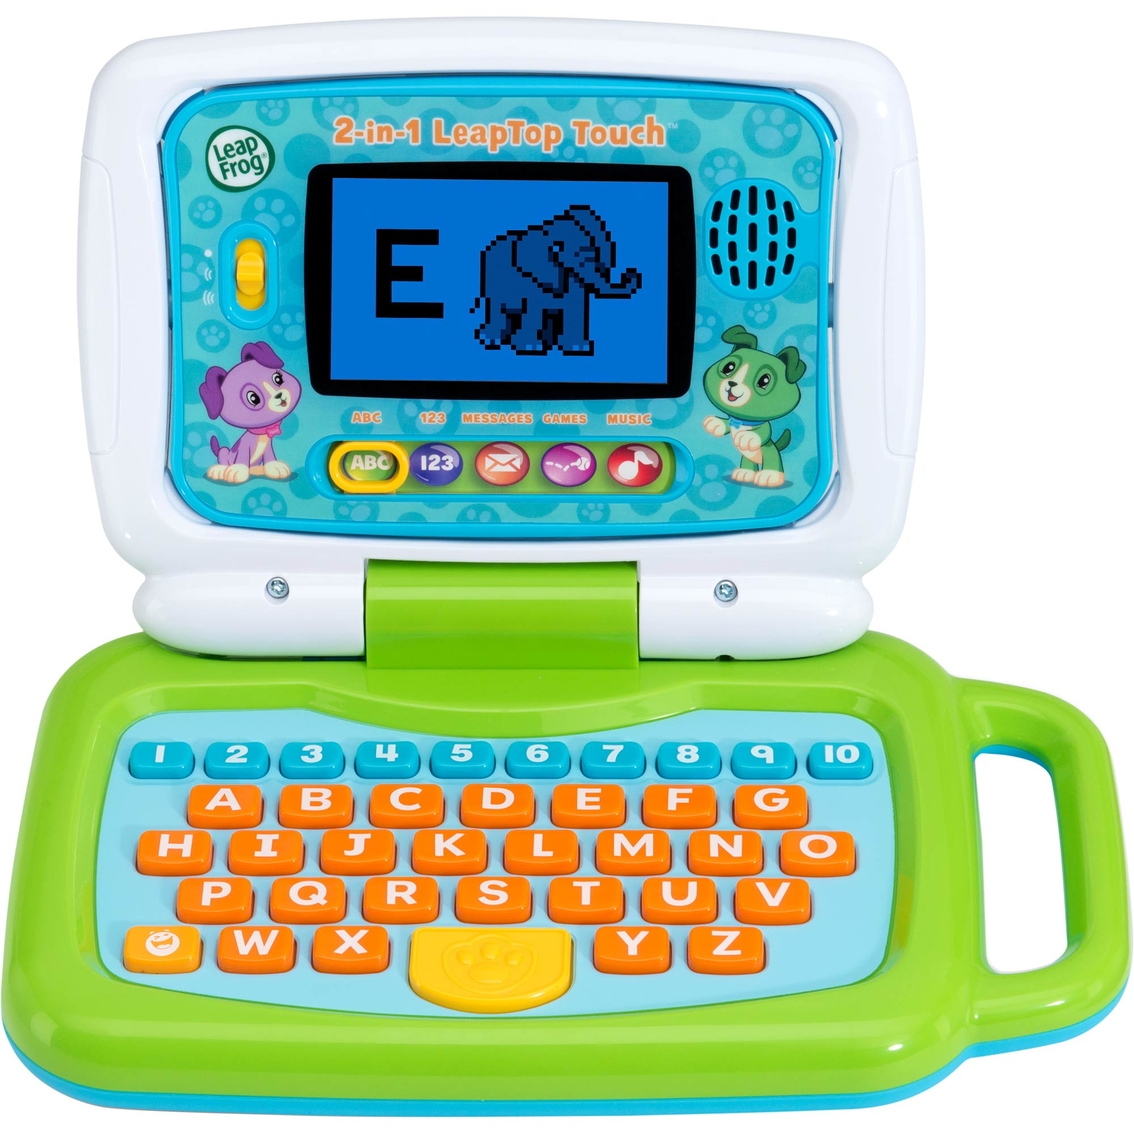 VTech Leap Top Touch 2 in 1 Laptop - Image 2 of 2